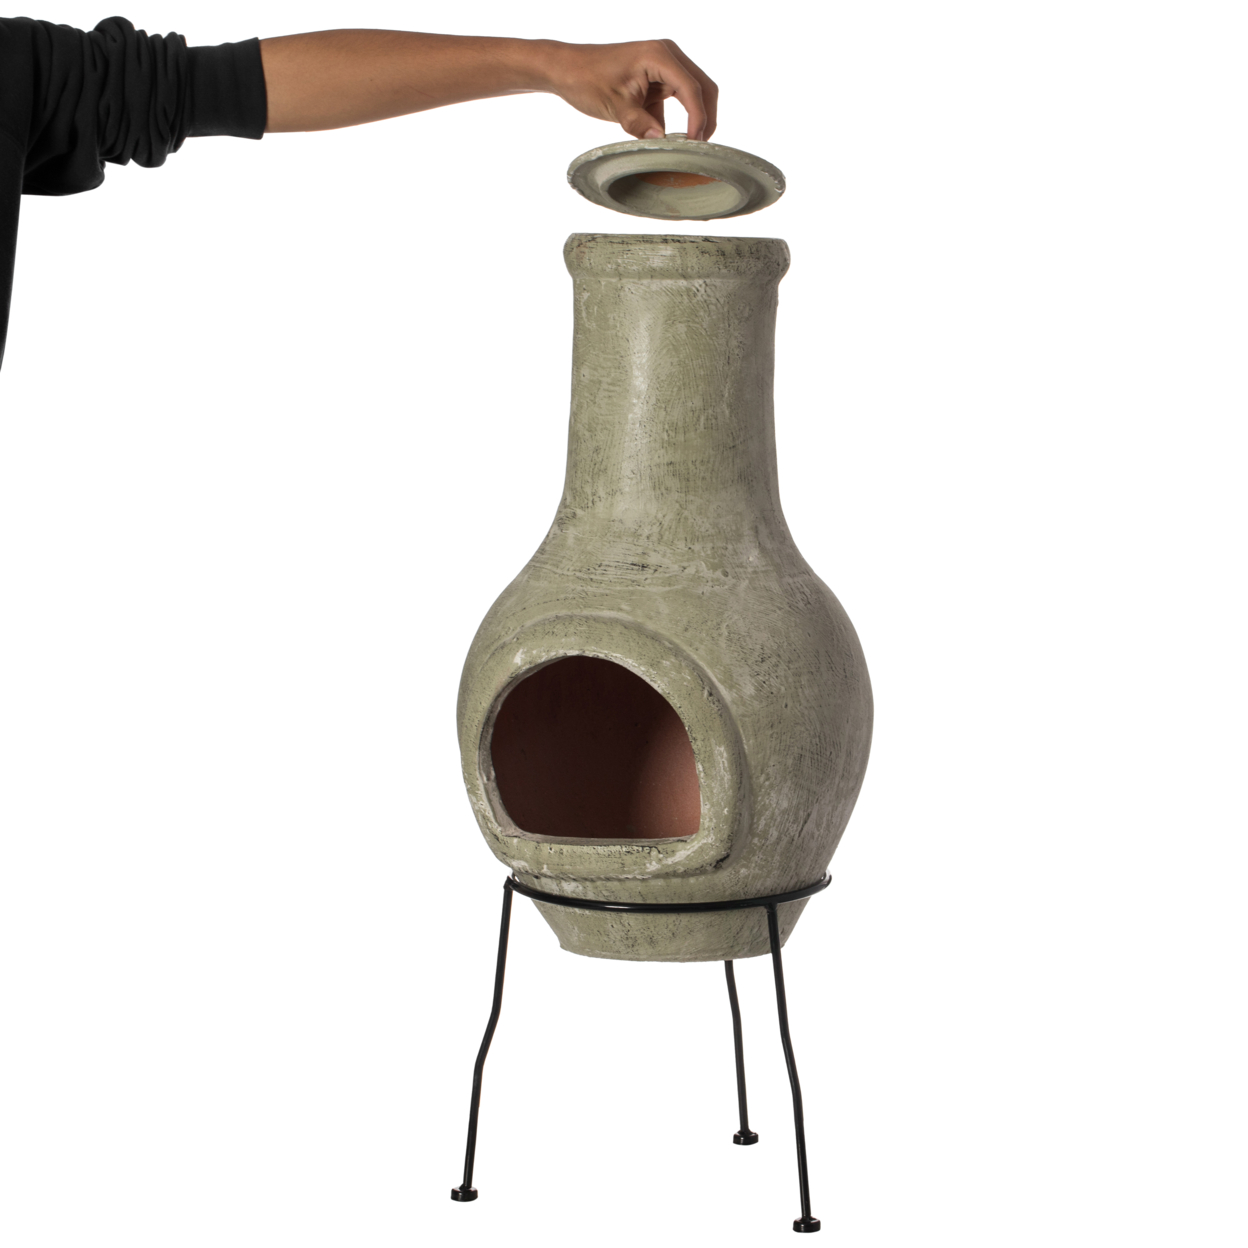 Beige Outdoor Clay Chiminea Outdoor Fireplace Scribbled Design Charcoal Burning Fire Pit With Sturdy Metal Stand, Barbecue, Cocktail Party